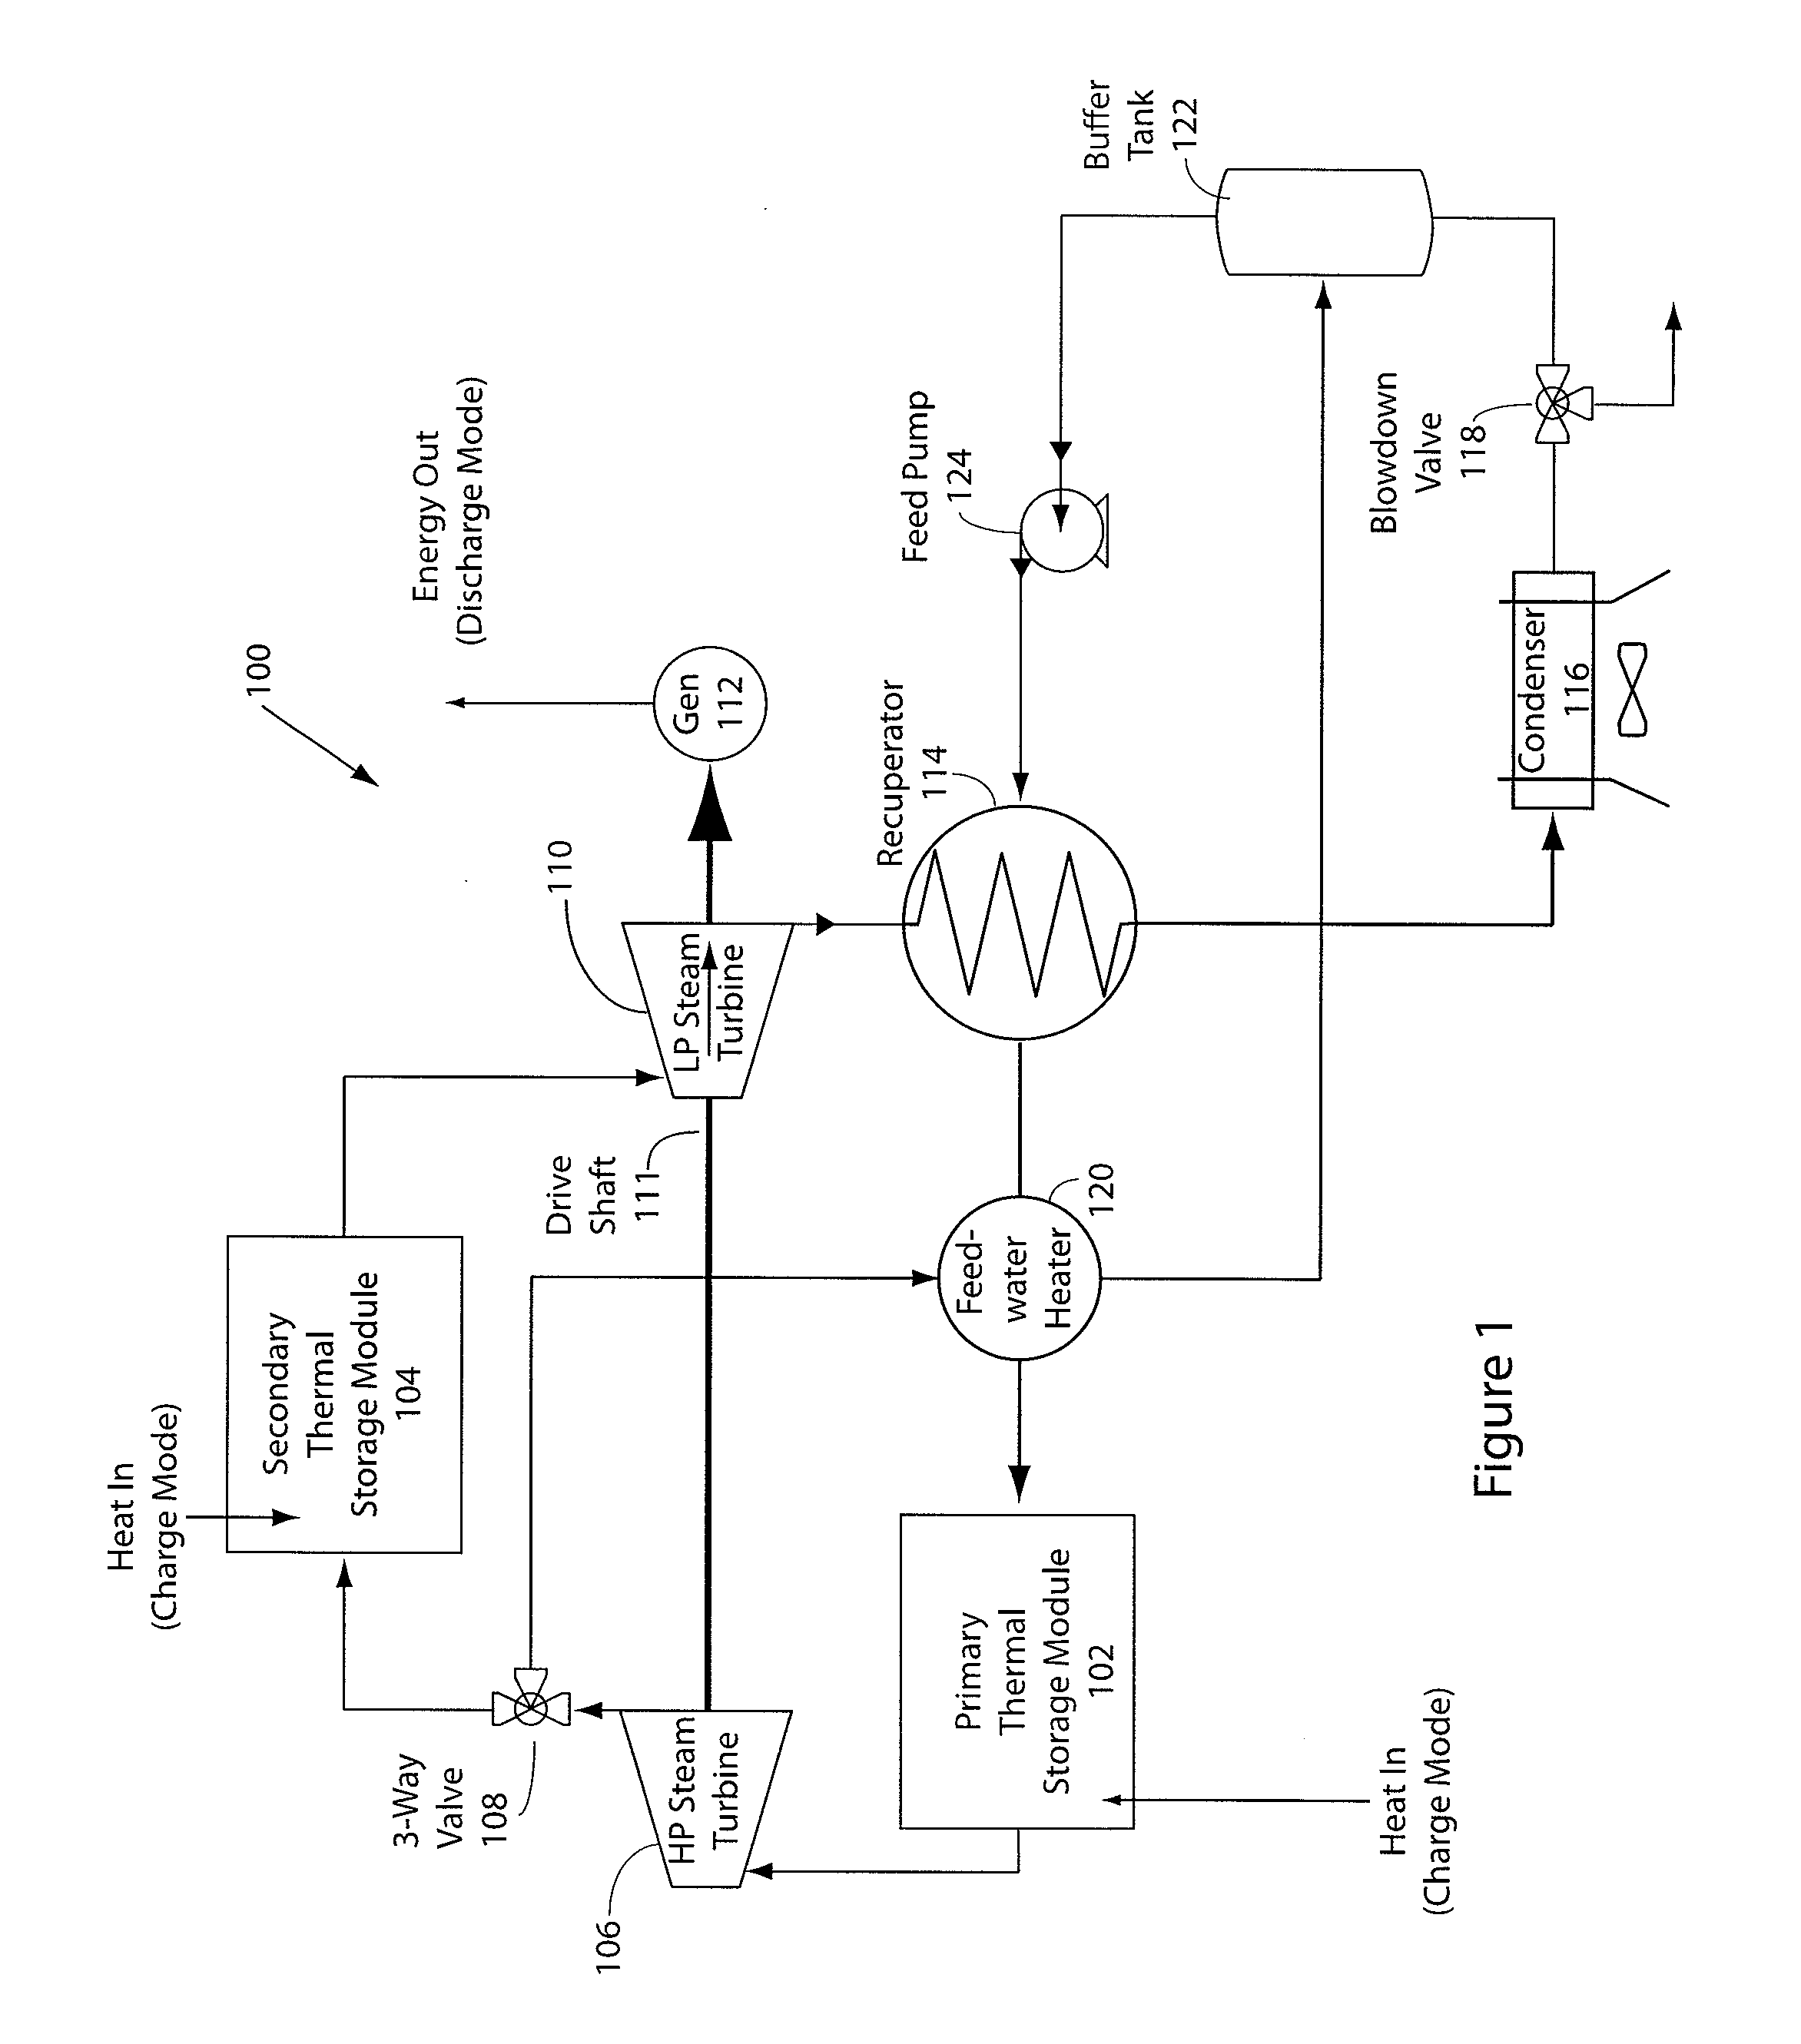 System and method for thermal energy storage and power generation